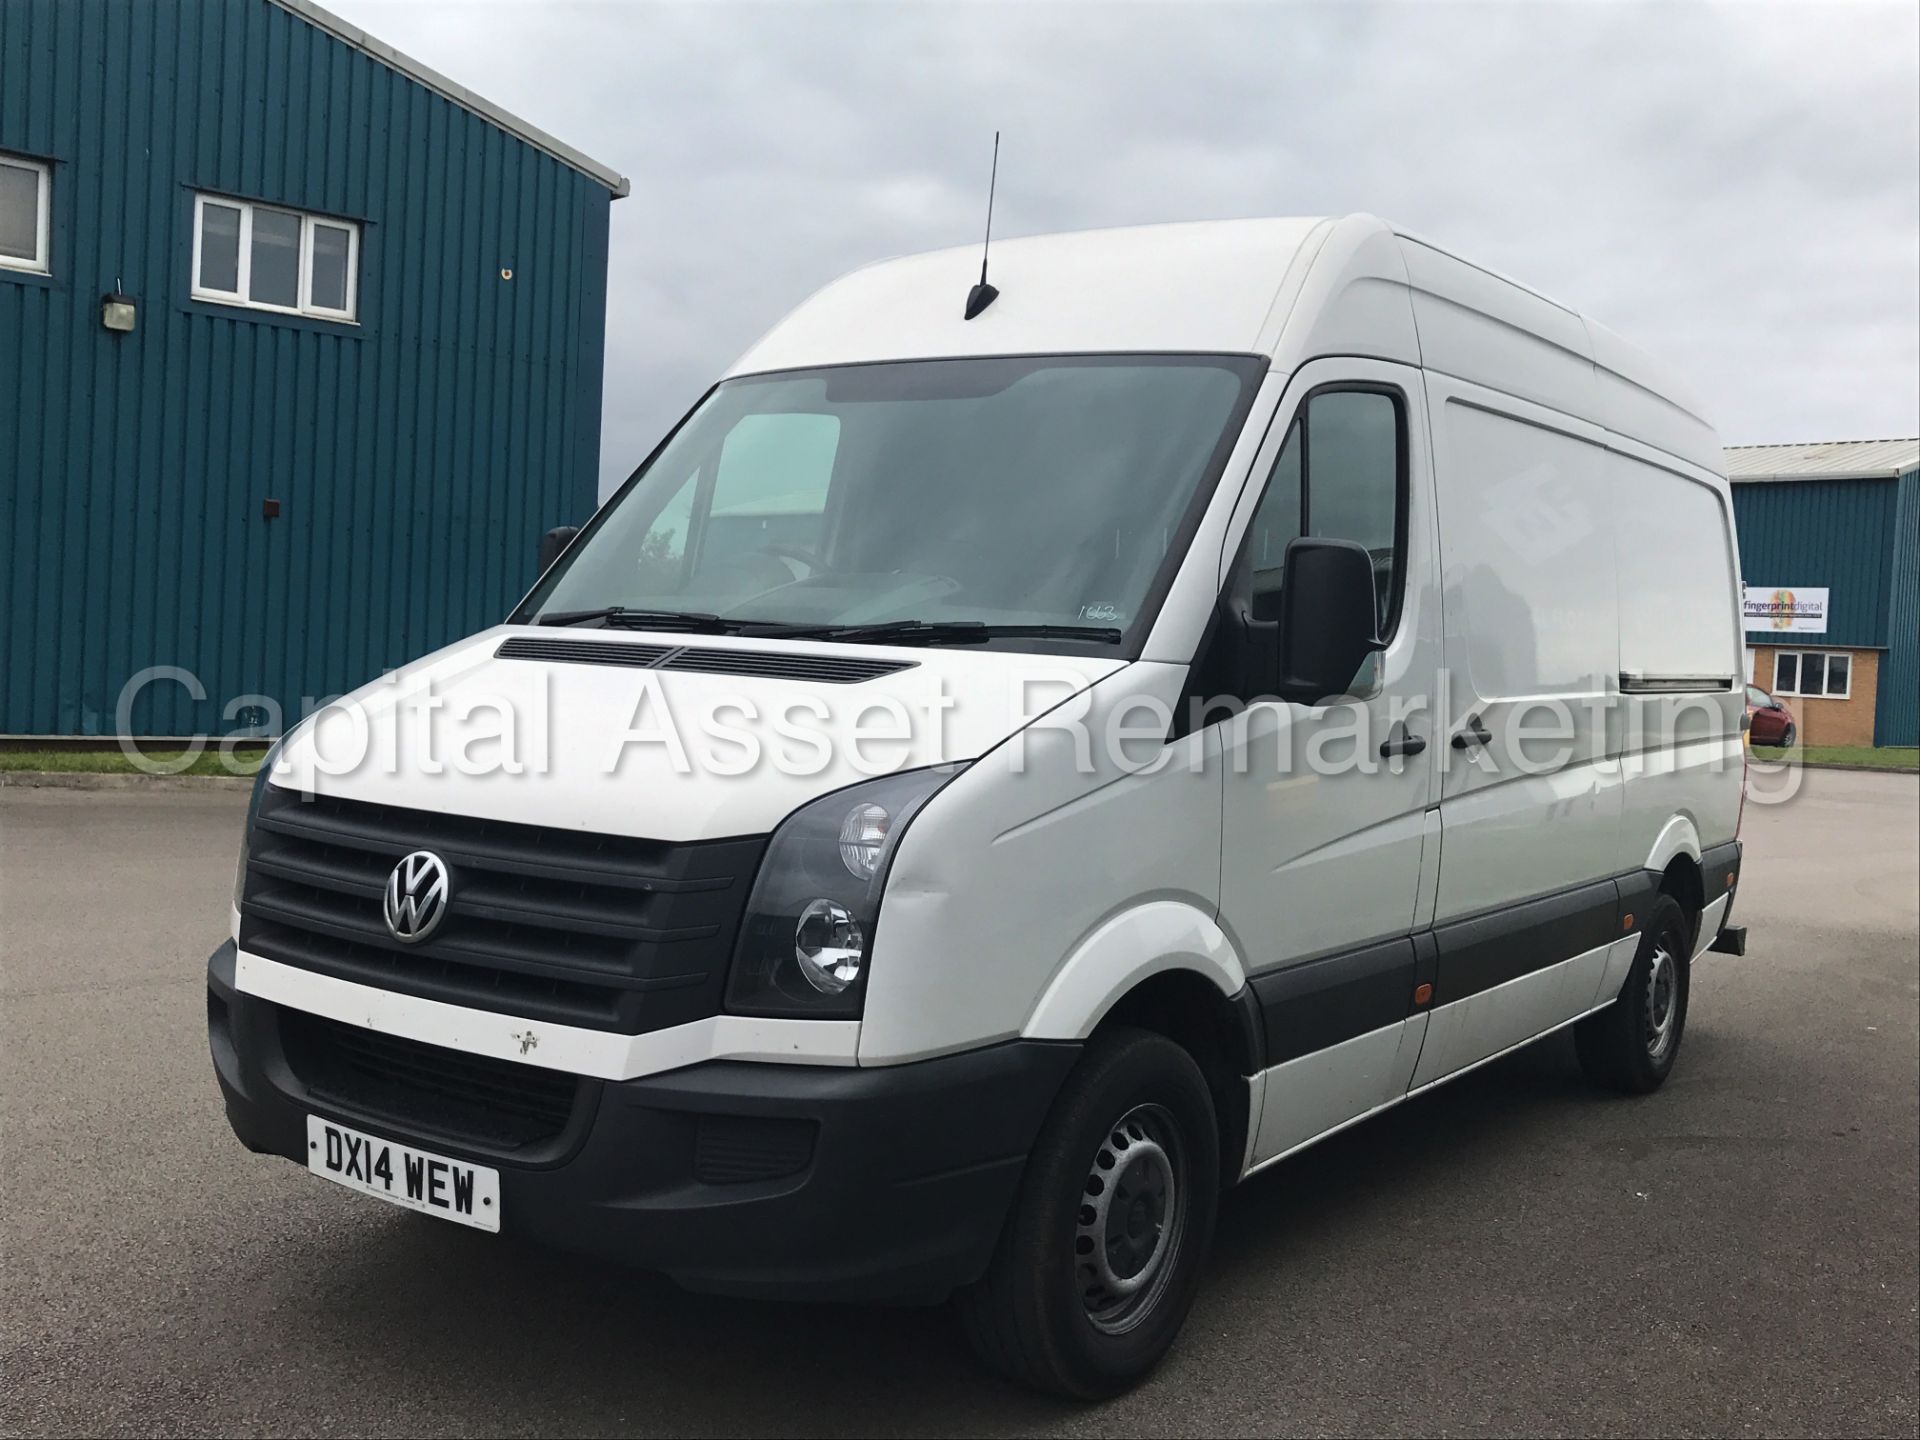 VOLKSWAGEN CRAFTER CR35 'MWB HI-ROOF' (2014) '2.0 TDI - 109 PS - 6 SPEED' *1 COMPANY OWNER FROM NEW* - Image 3 of 19